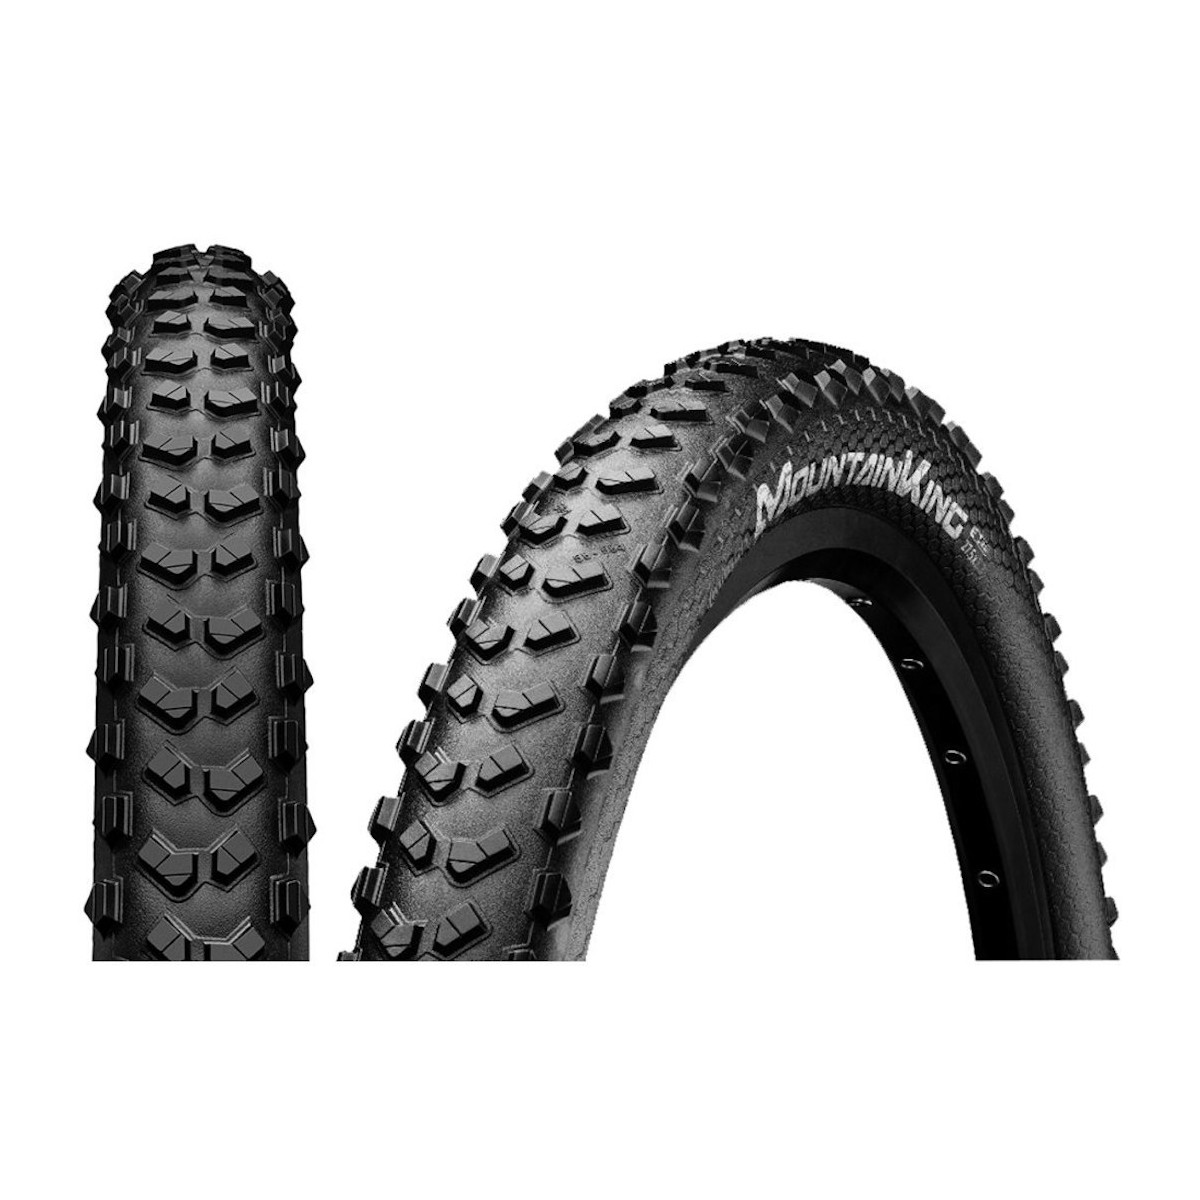 CONTINENTAL MOUNTAIN KING 27.5 X 2.30 tyre